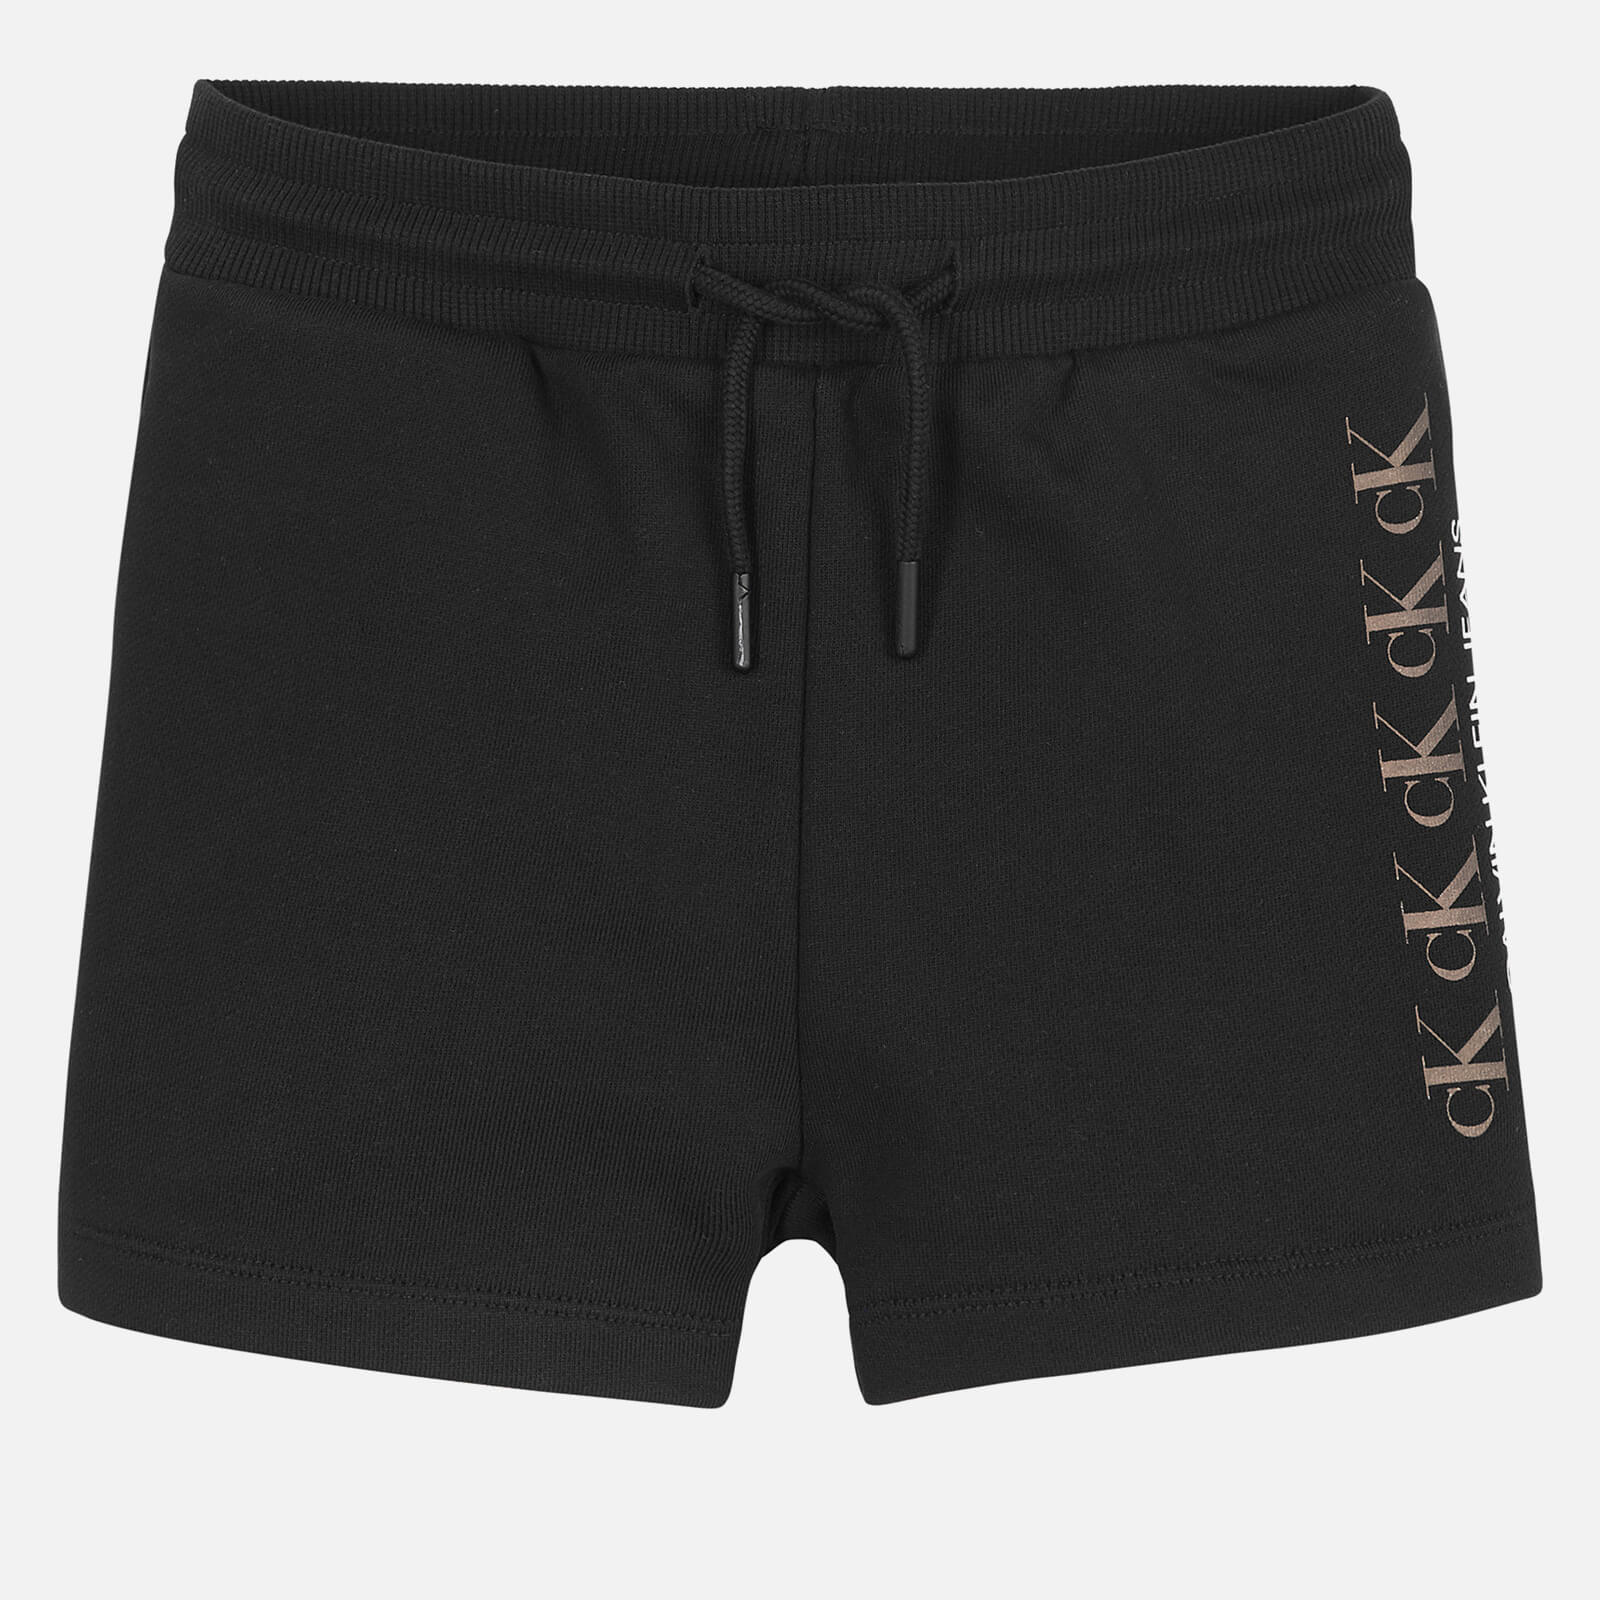 Calvin Klein Jeans Girls' Ck Repeat Foil Knit Shorts - Black - 8 Years